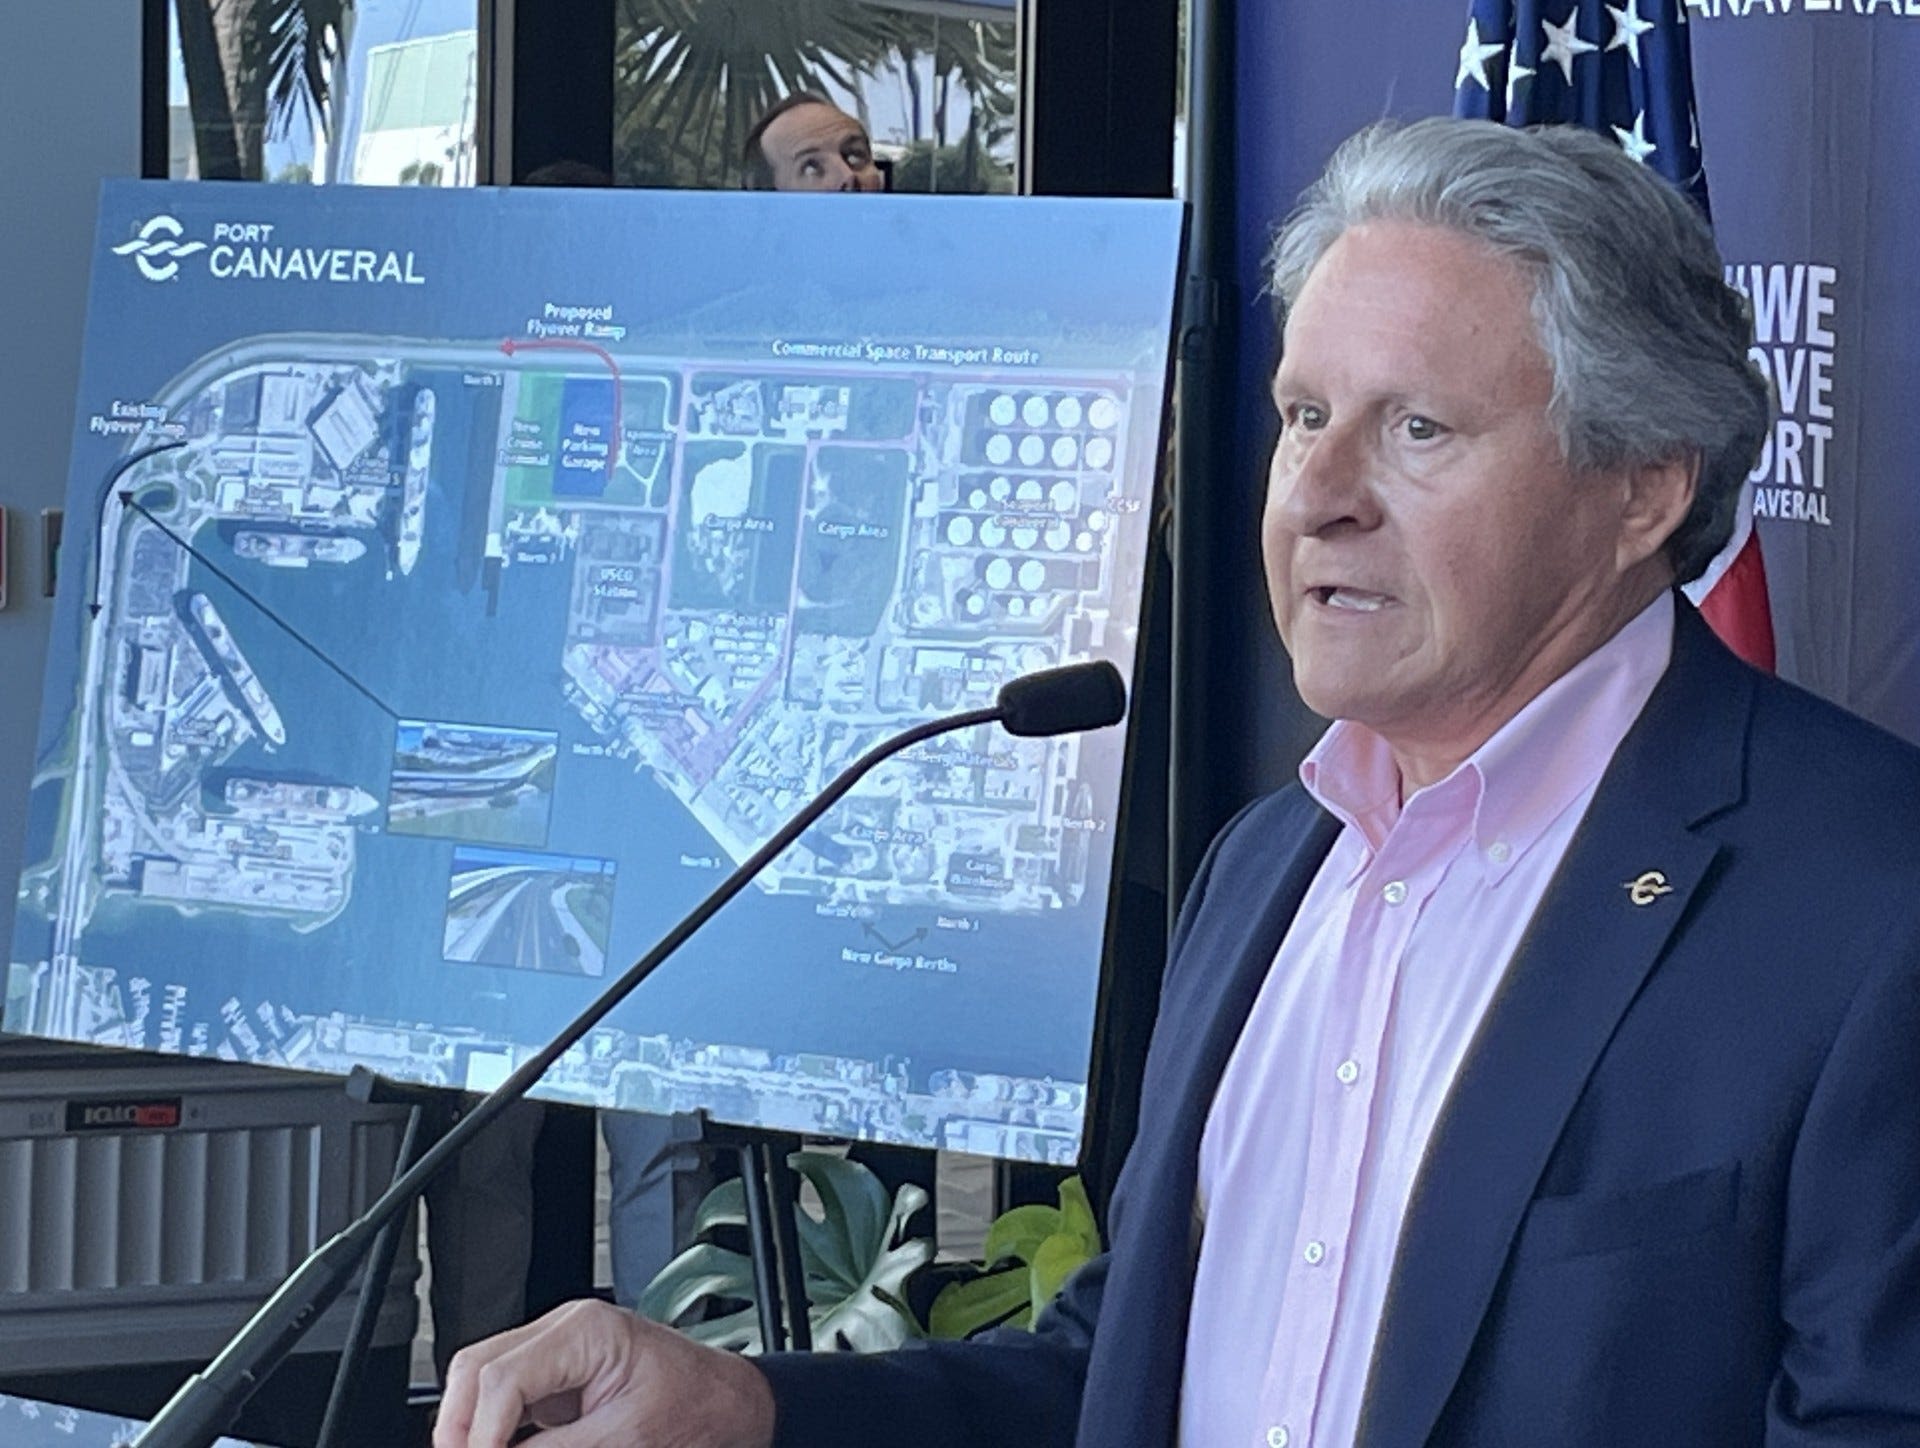 Port Canaveral announces plans for new north side cruise terminal at cargo berth side